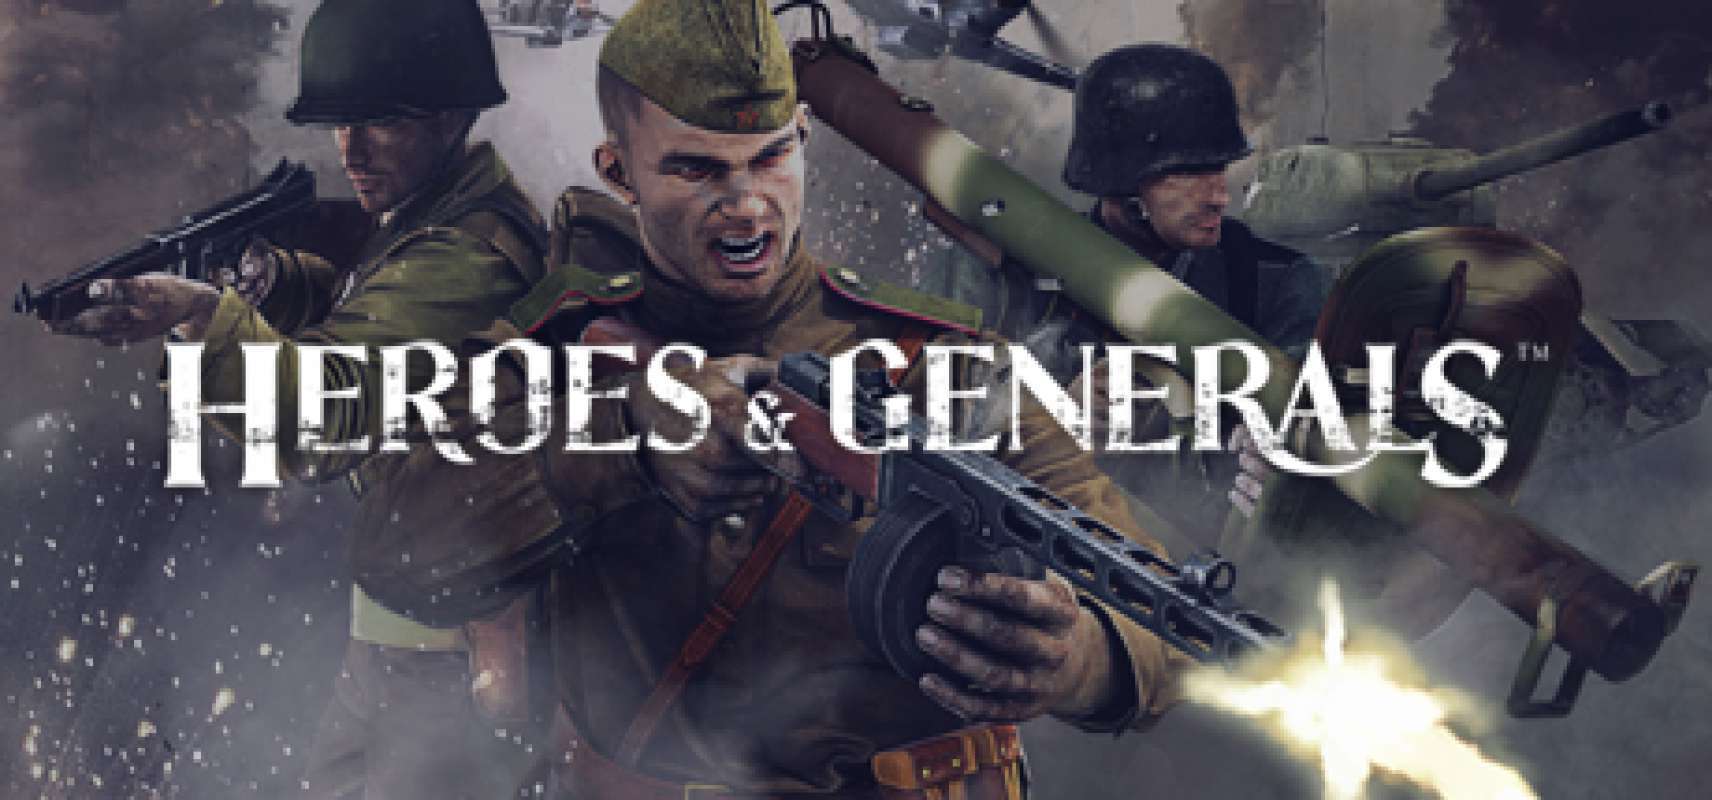 Heroes and generals on steam фото 50